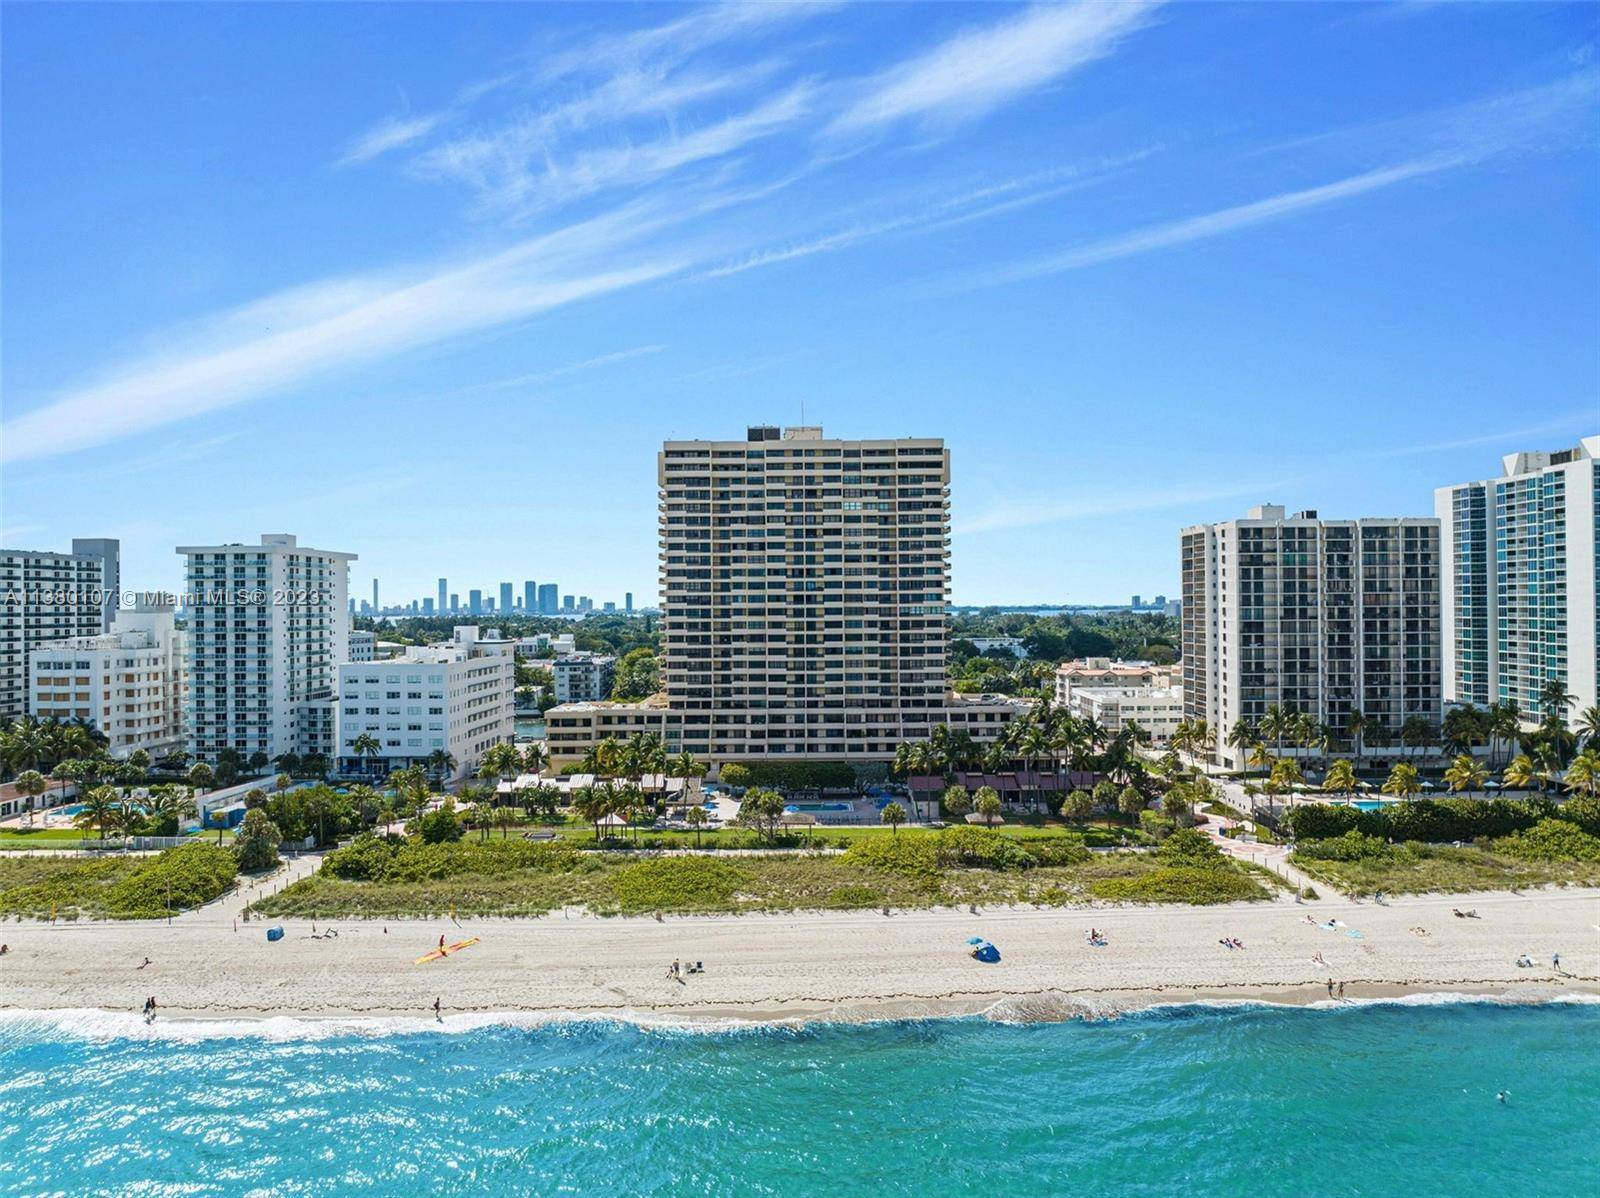 BEAUTIFULLY RENOVATED FURNISHED LUXURY BEACH RESIDENCE COMPLETELY TURNKEY AT THE AWARD WINNING OCEANFRONT CLUB ATLANTIS IN MIAMI BEACH !